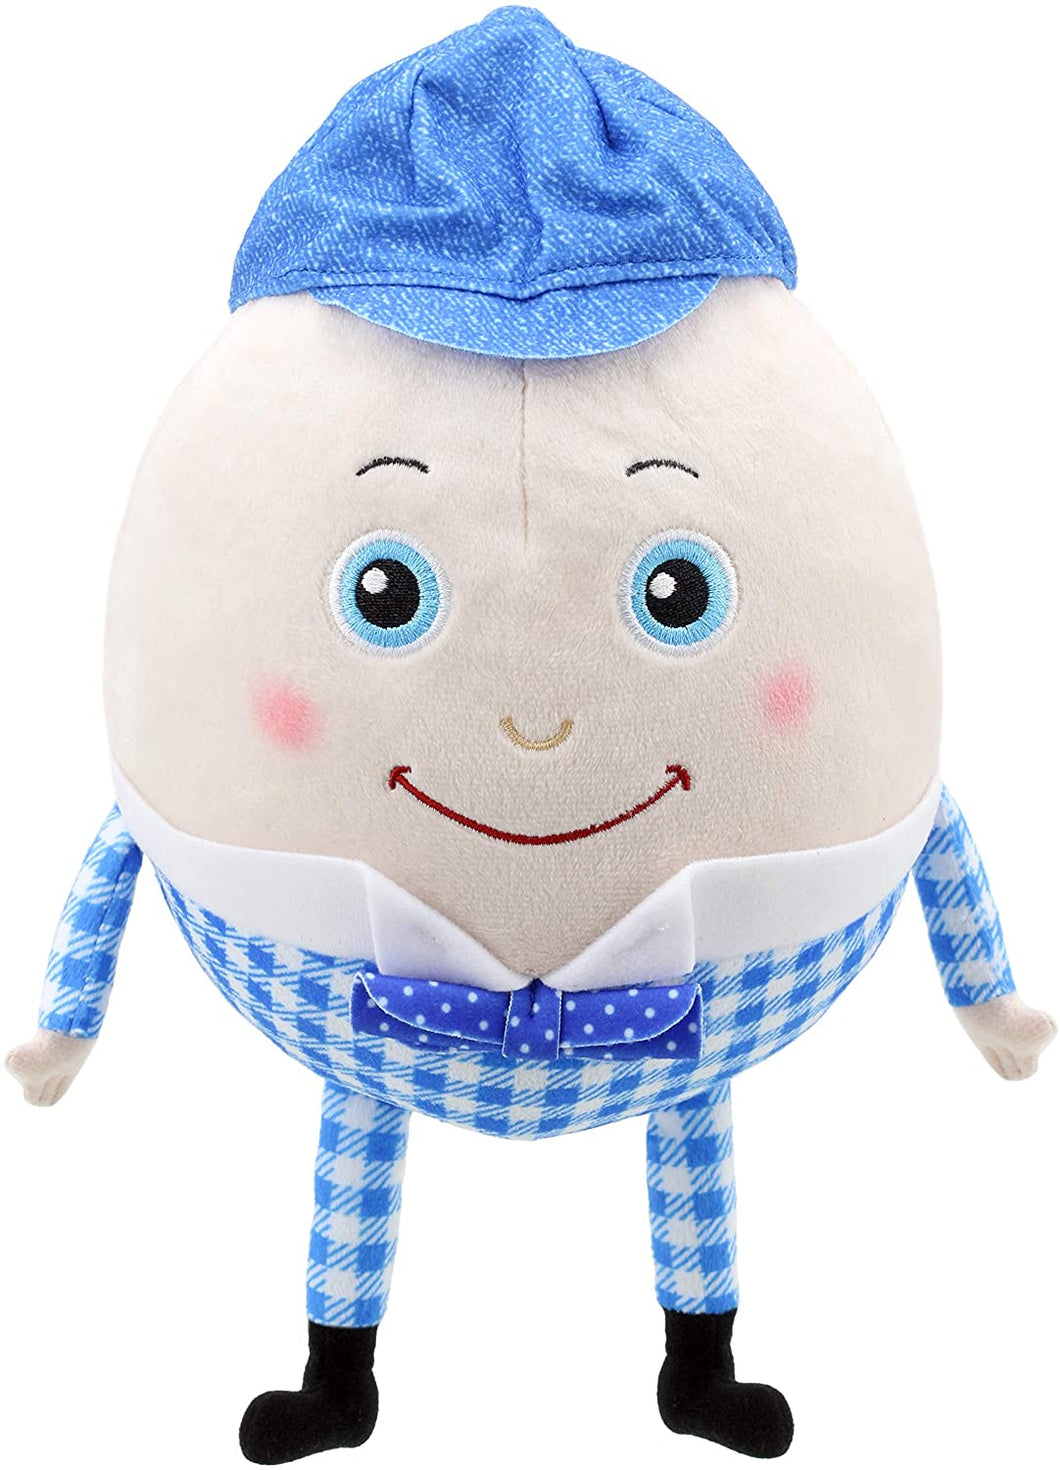 The Puppet Company Humpty Dumpty Soft Toy The Bubble Room Toy Store Dublin